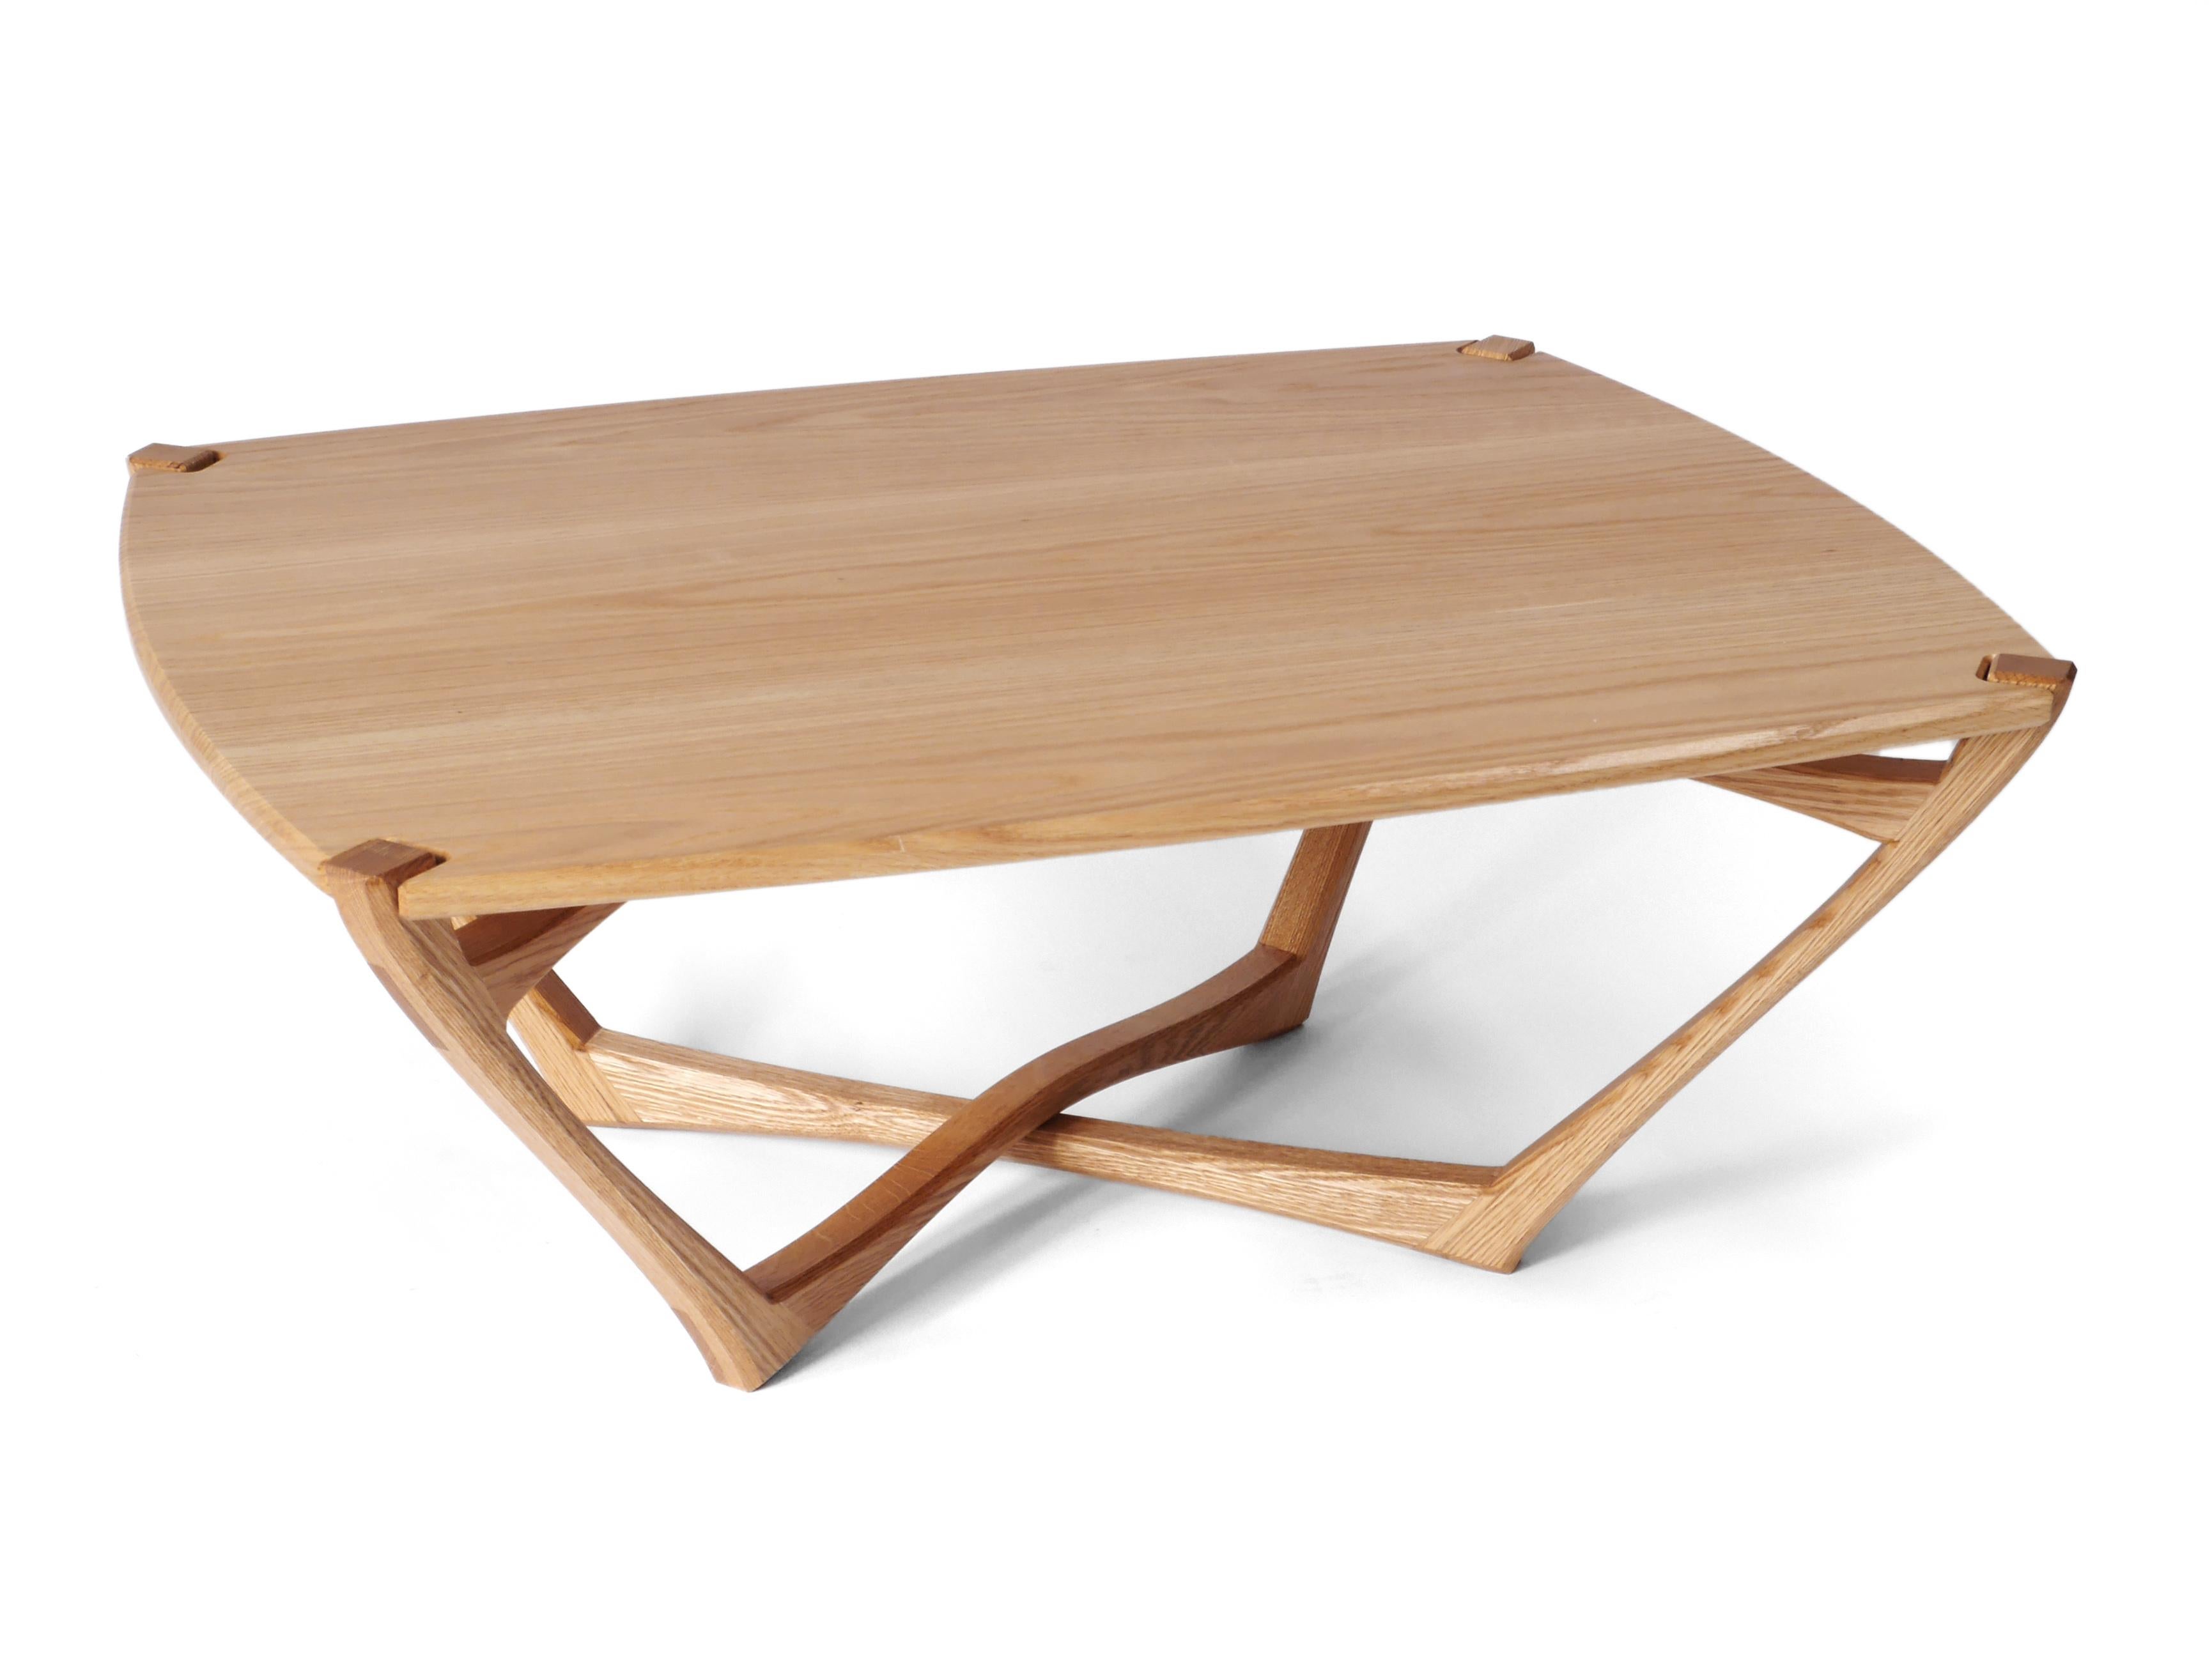 We have one of these in stock, available for immediate shipment.

The Mistral Coffee Table is playful and full of life with a fluid form and detail rich construction. It’s made out of solid oak hardwood and built with exposed joinery that has been